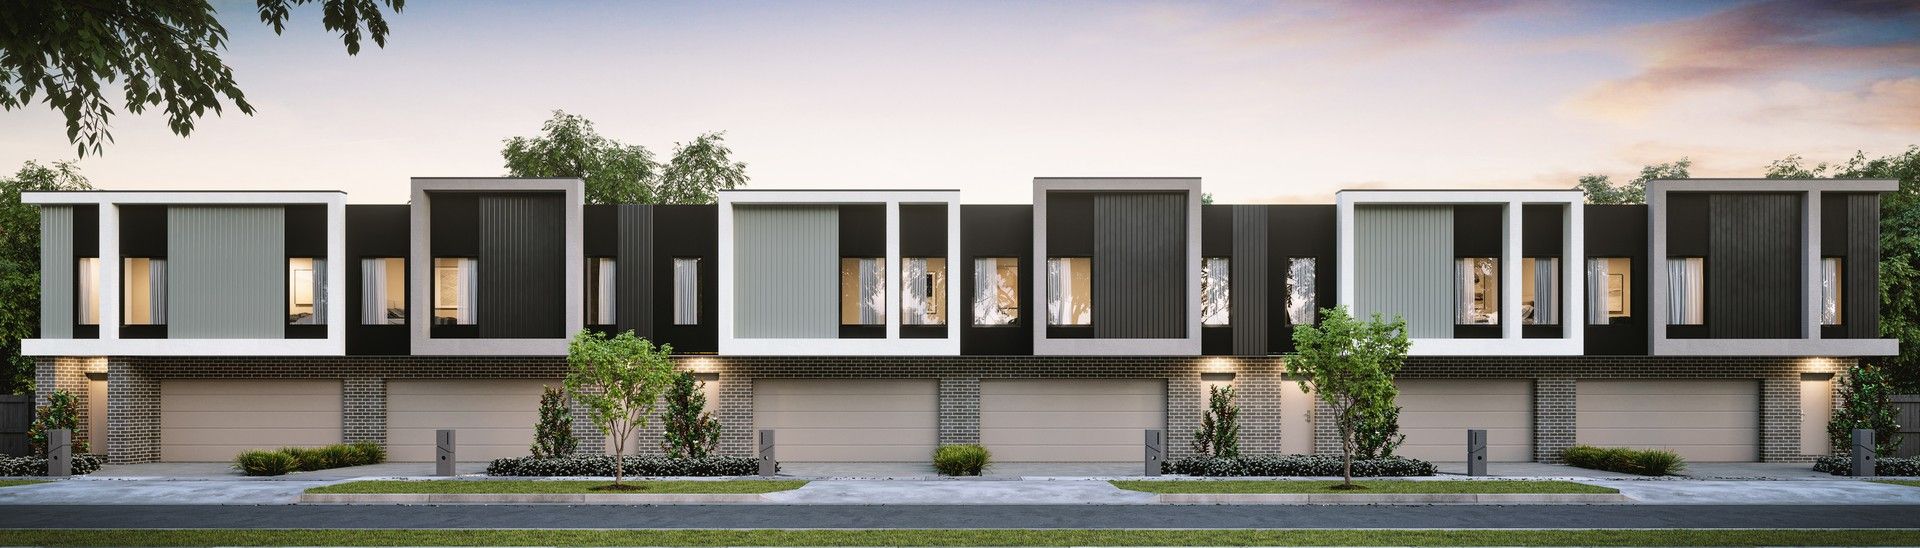 Protea Corner Townhome by Nostra, Mickleham VIC 3064, Image 1